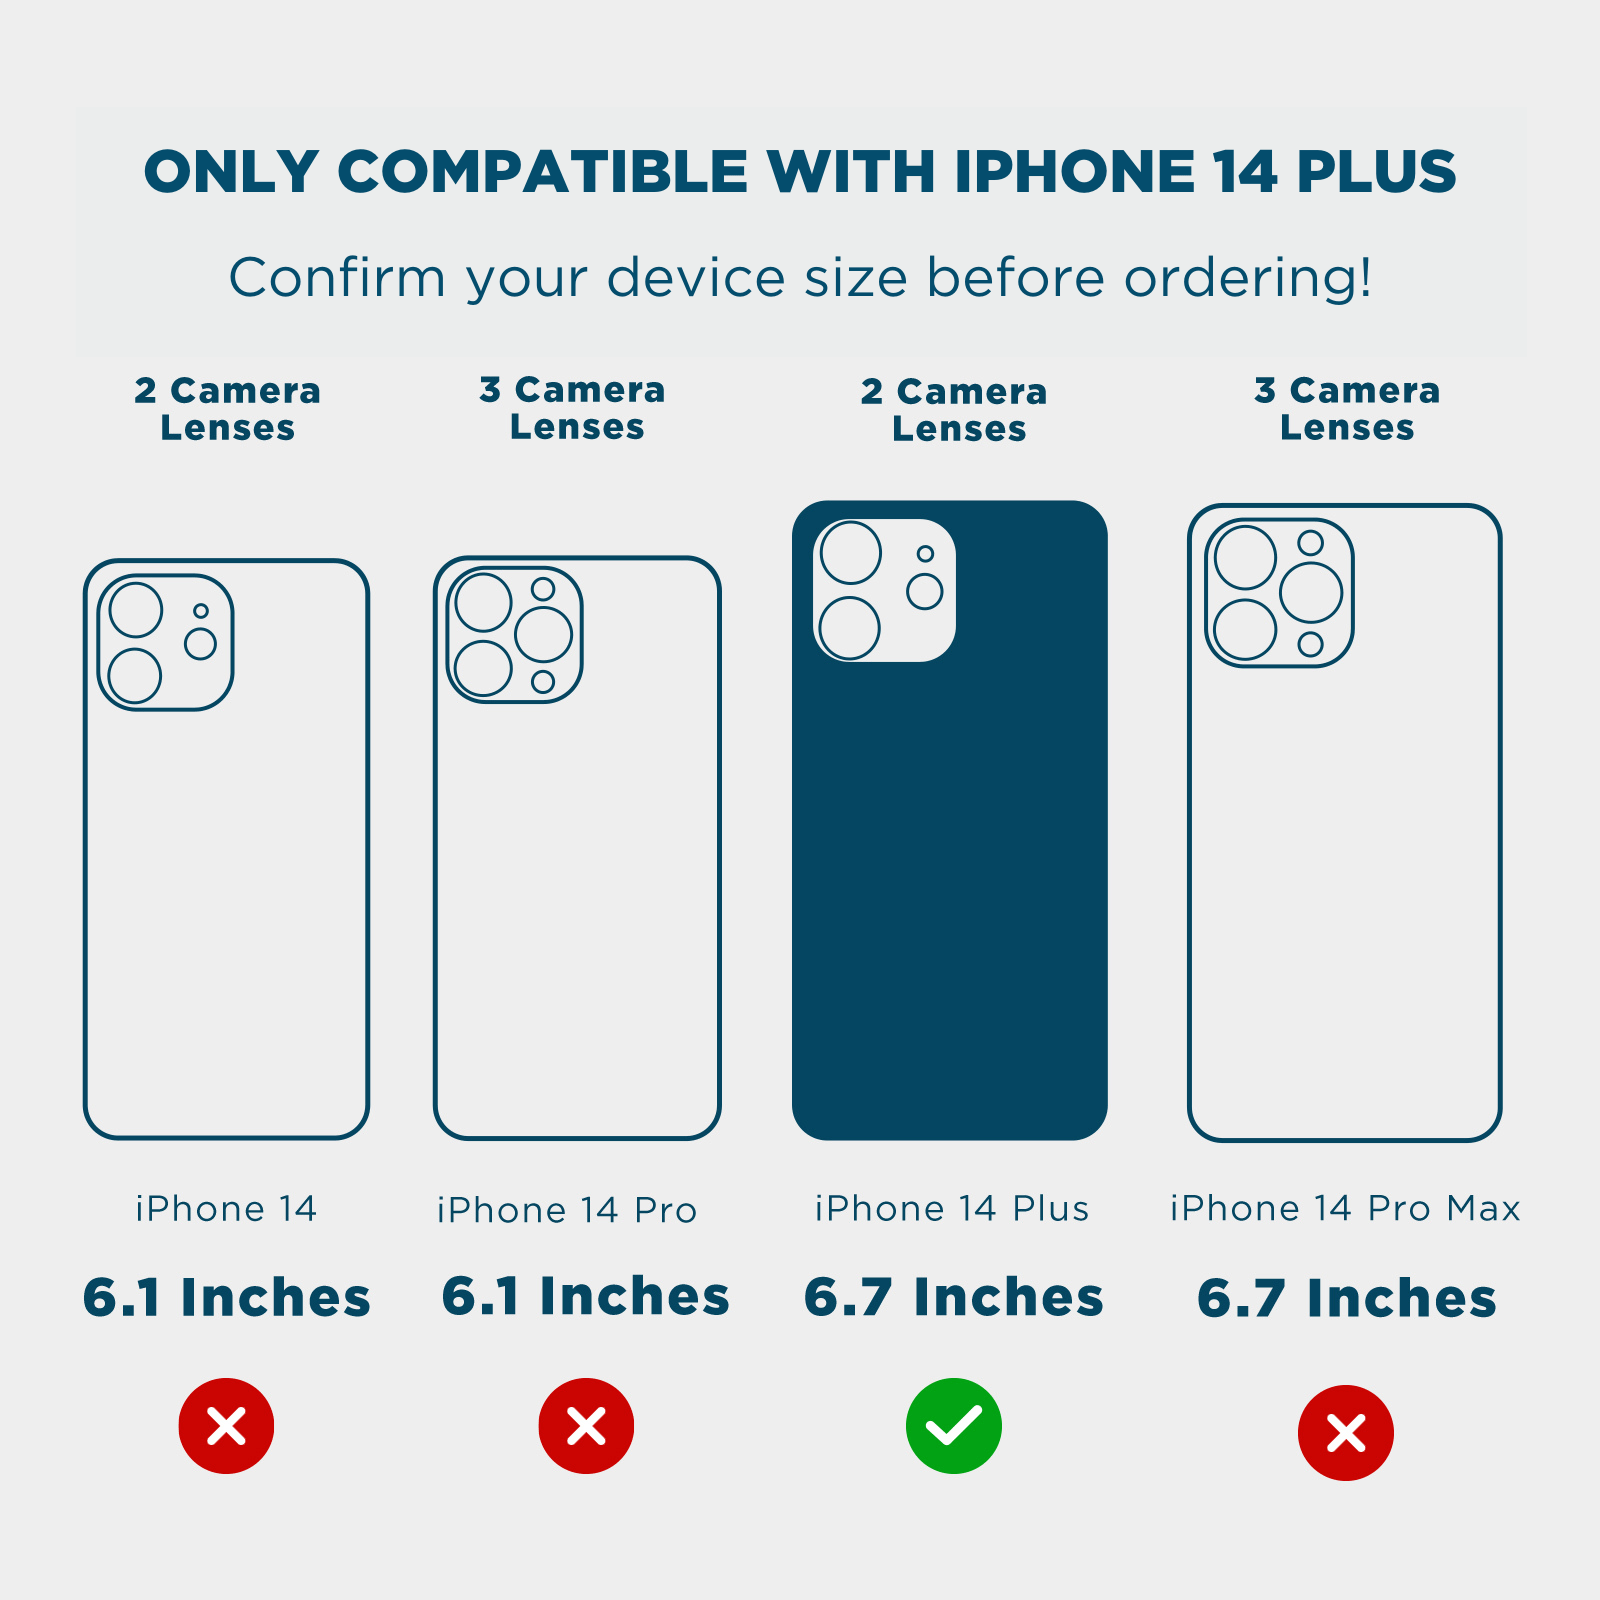 ONLY COMPATIBLE WITH IPHONE 14 PLUS. CONFIRM YOUR DEVICE SIZE BEFORE ORDERING! 2 CAMERA LENSES, 3 CAMERA LENSES, 2 CAMERA LENSES, 3 CAMERA LENSES, 6.1 INCHEC, 6.1 INCHES, 6.7 INCHES, 6.7 INCHES. COLOR::hot pink